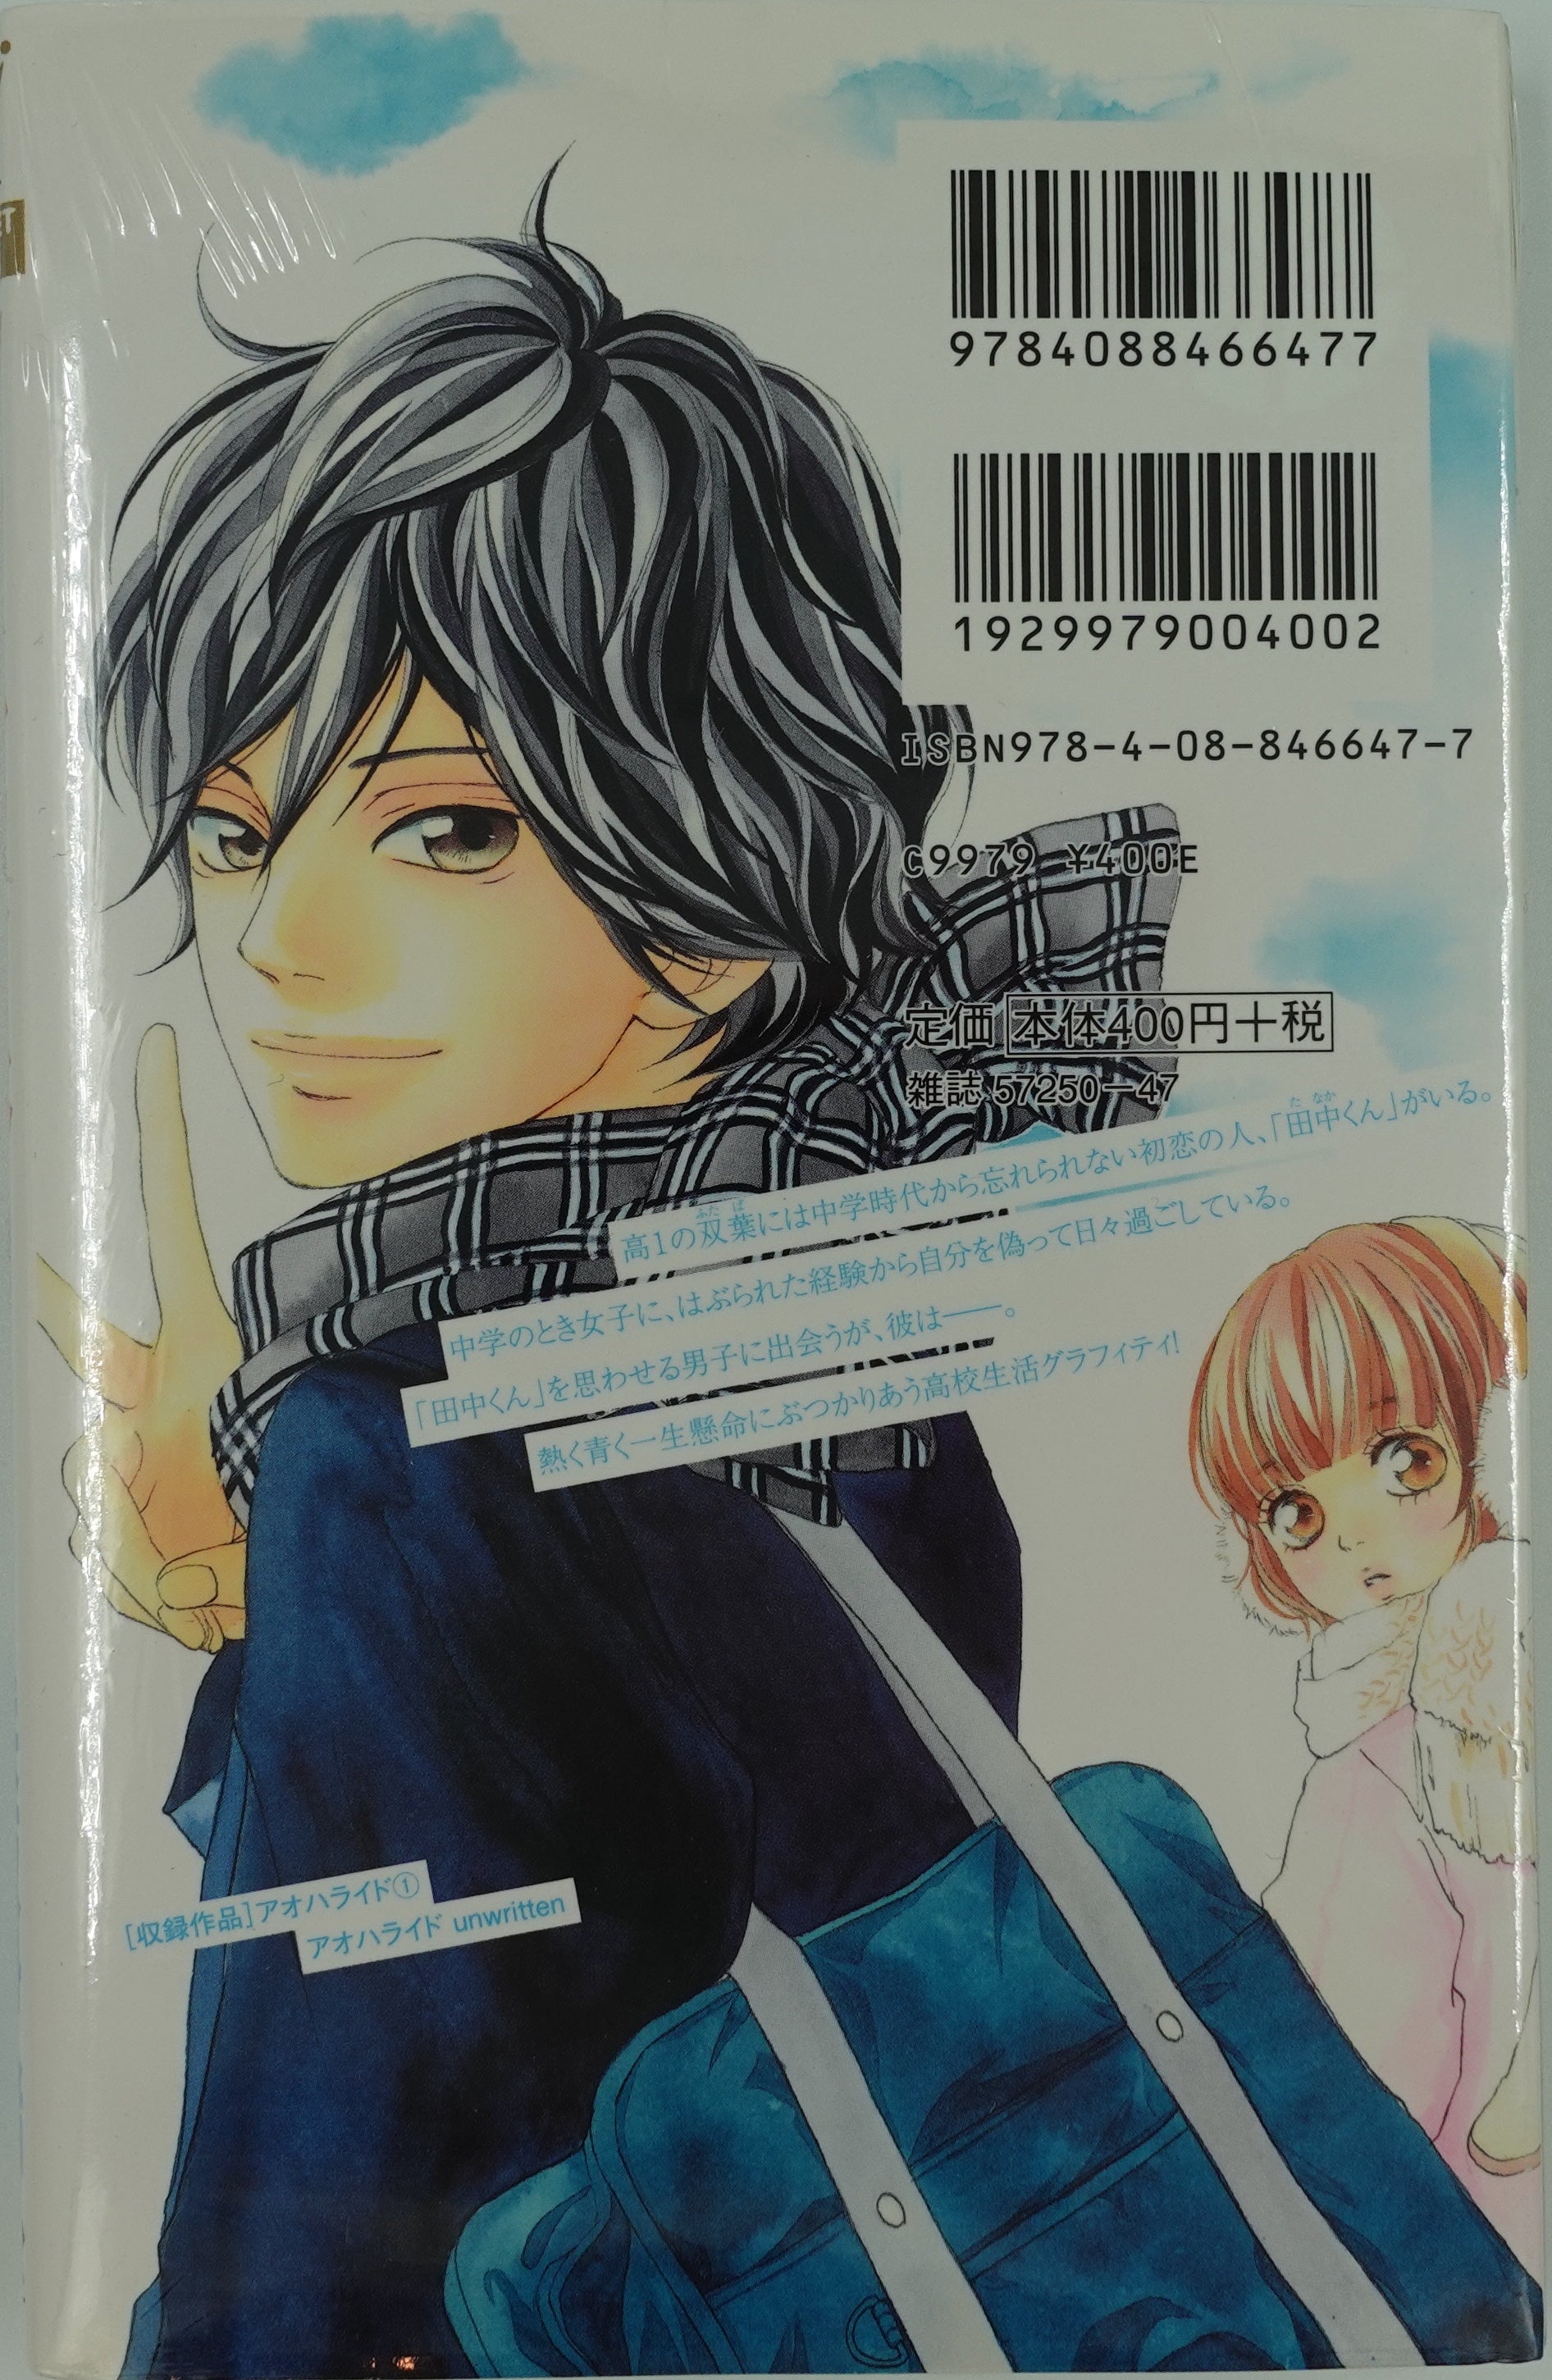 Ao Haru Ride, Vol. 2, Book by Io Sakisaka, Official Publisher Page